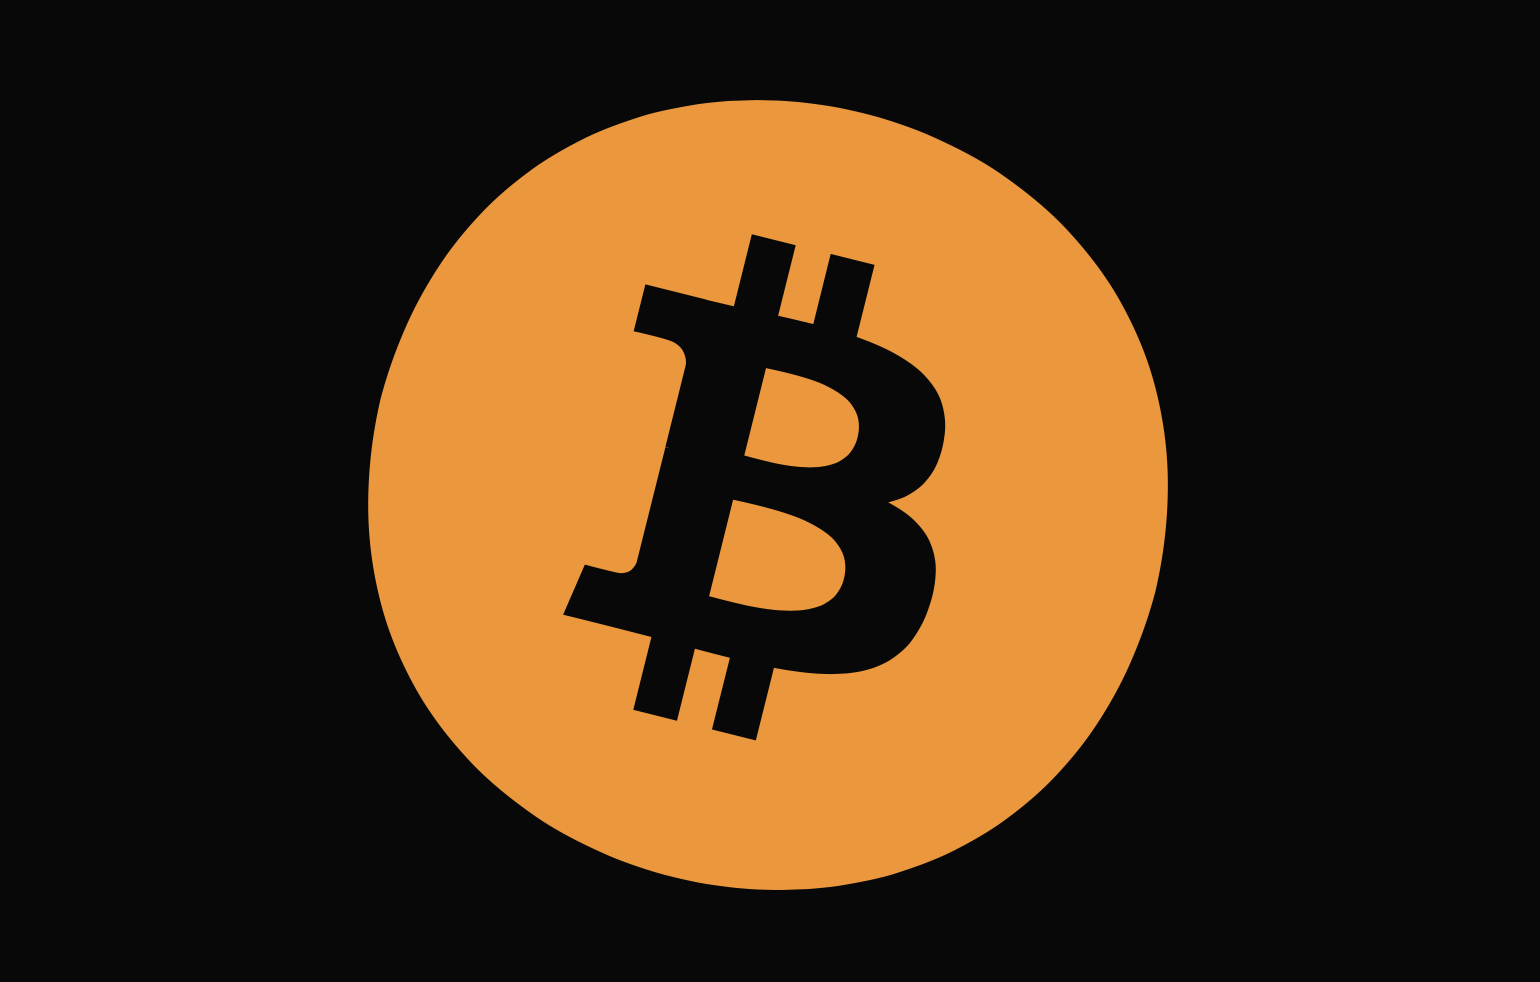 Example Bitcoin Logo with FontAwesome